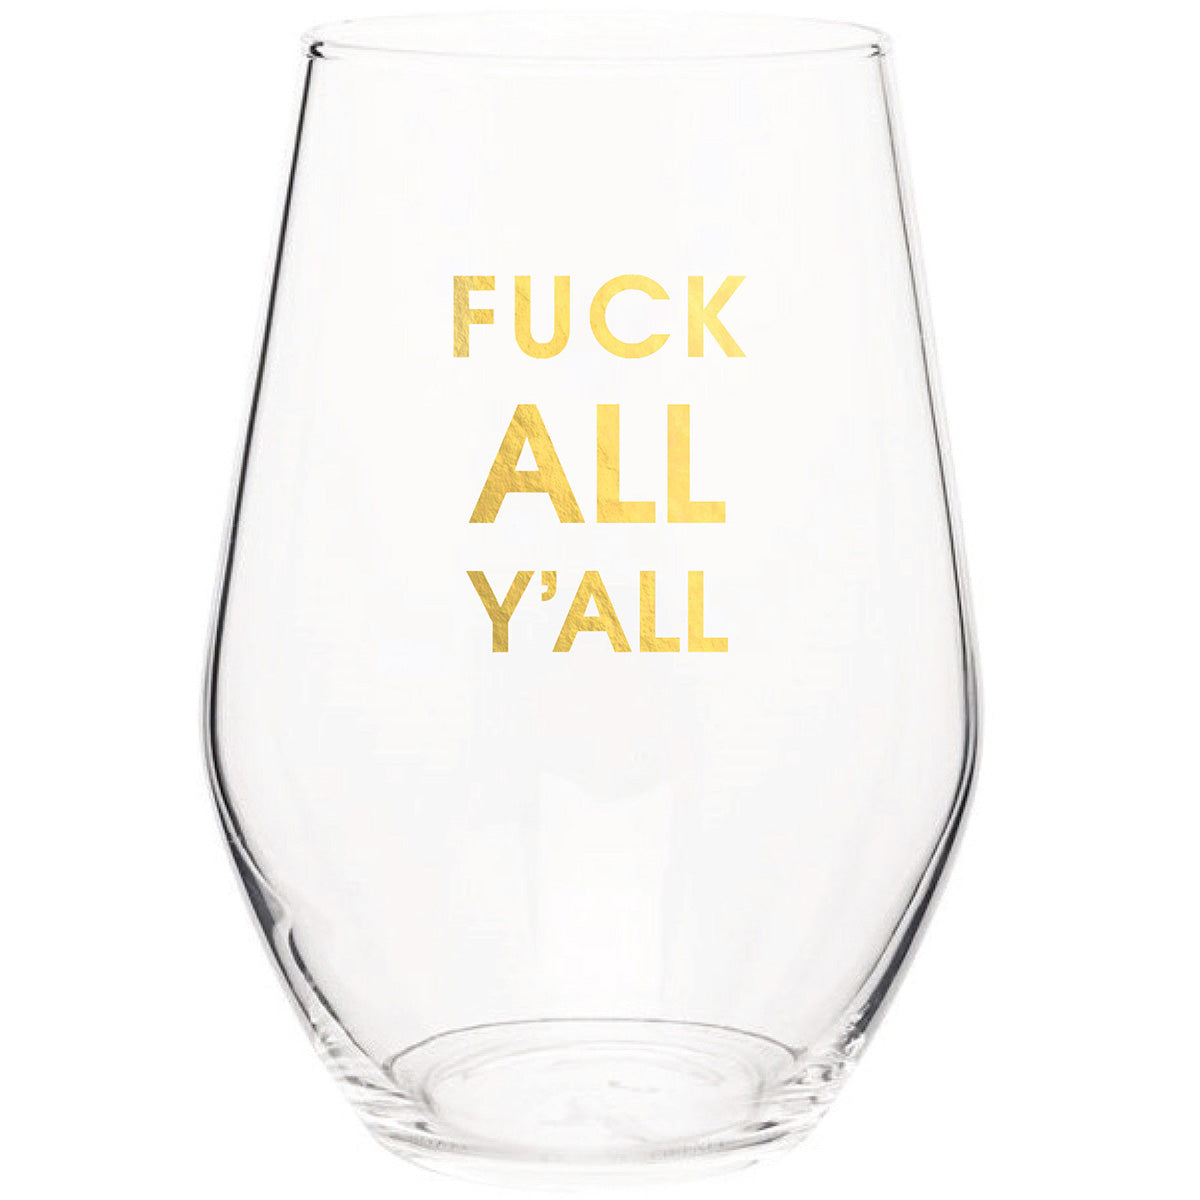 Fuck All Y'all - Gold Foil Stemless Wine Glass